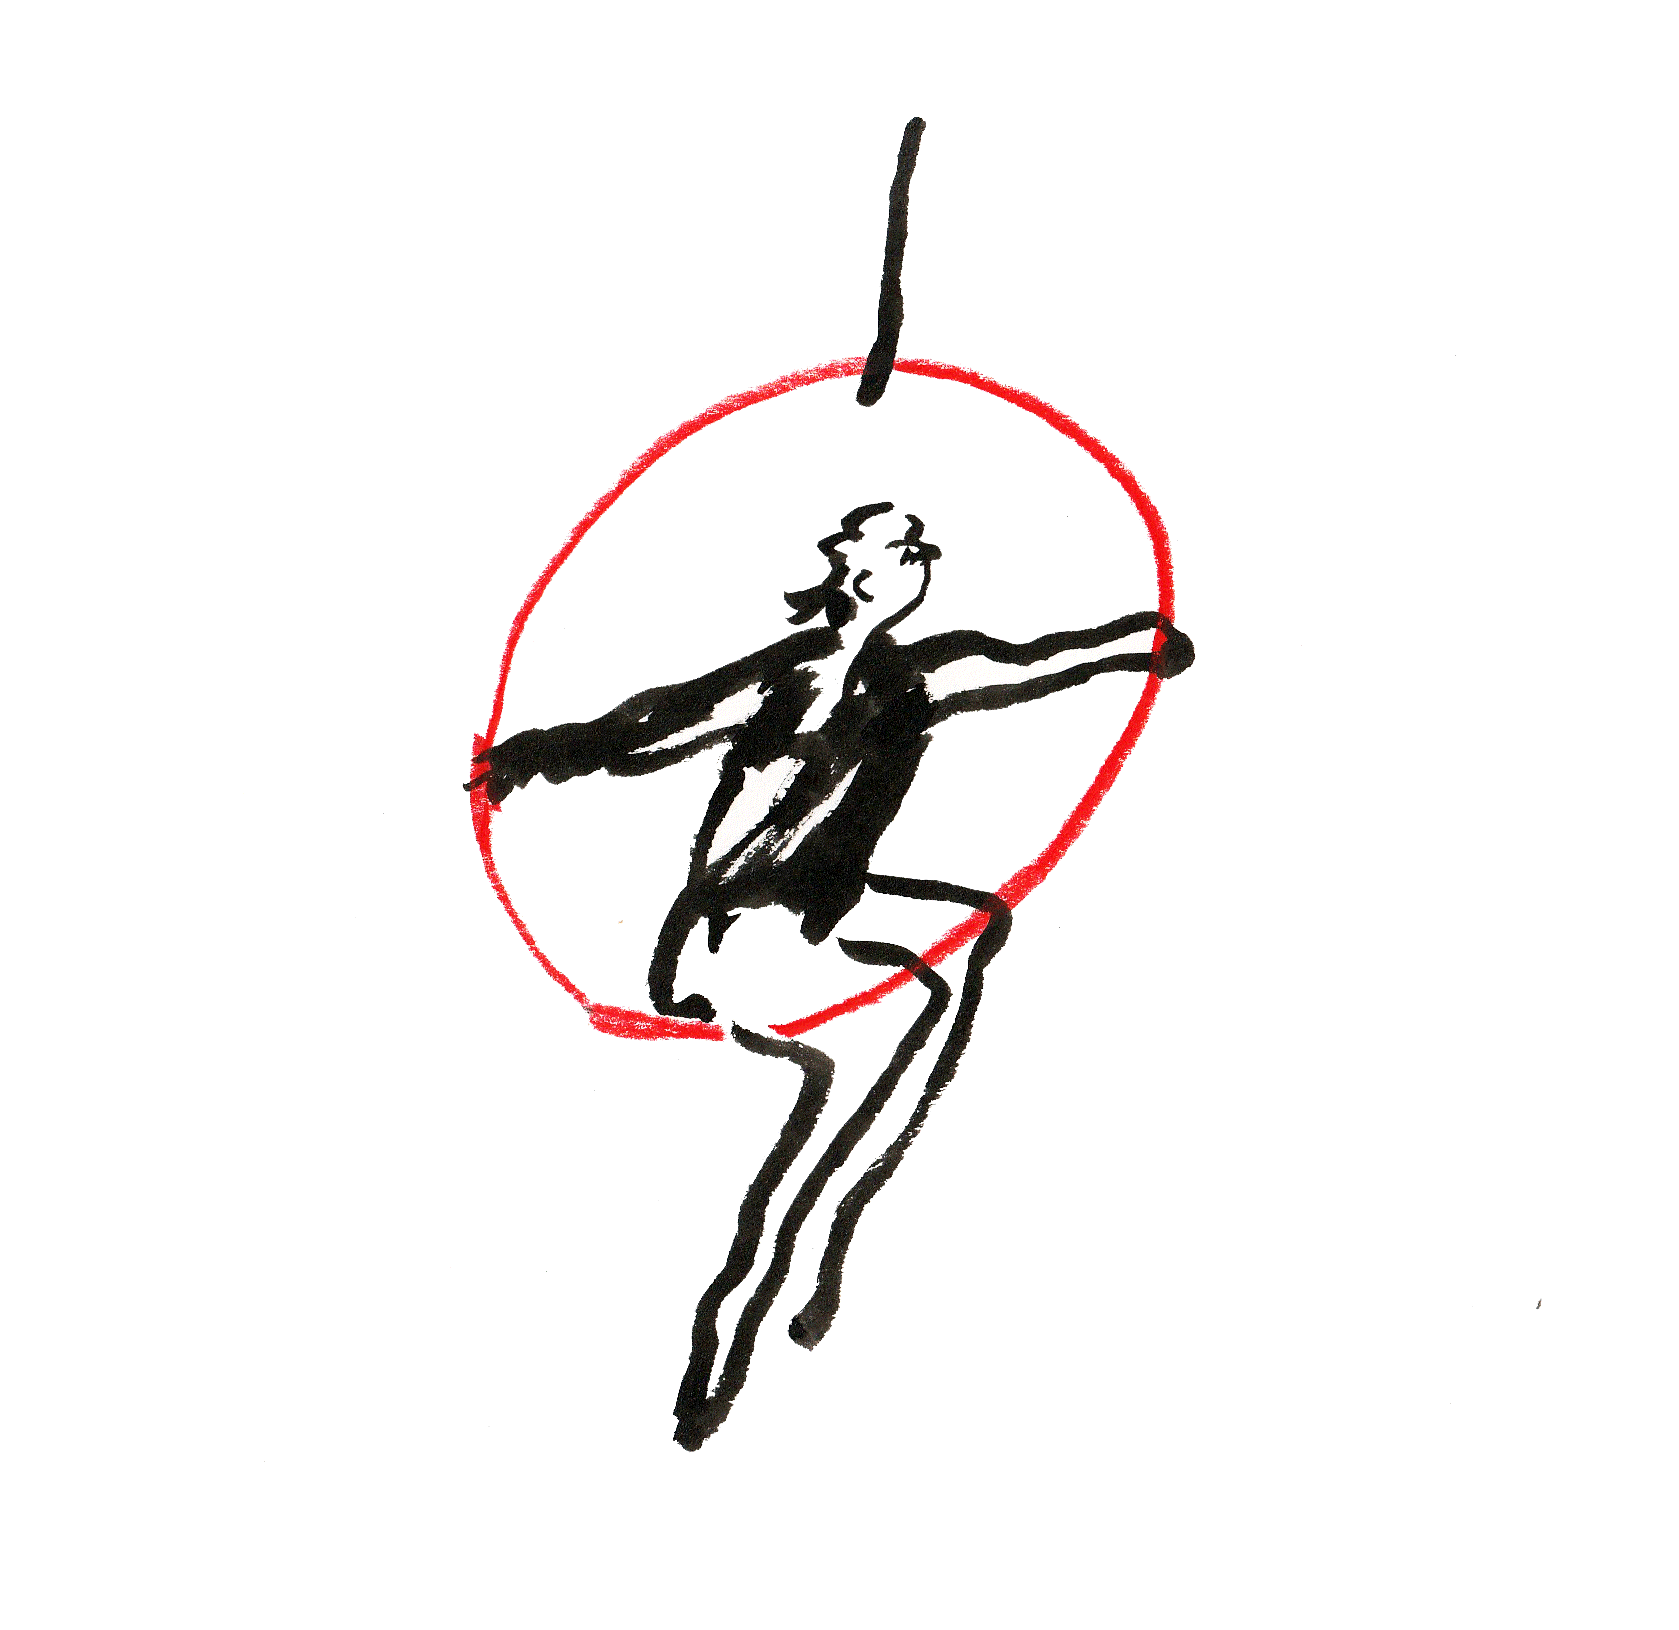 A hand-drawn GIF of a person sitting on a circus hoop, which twirls on itself. The hoop is red and the rest of the drawing in in black ink.